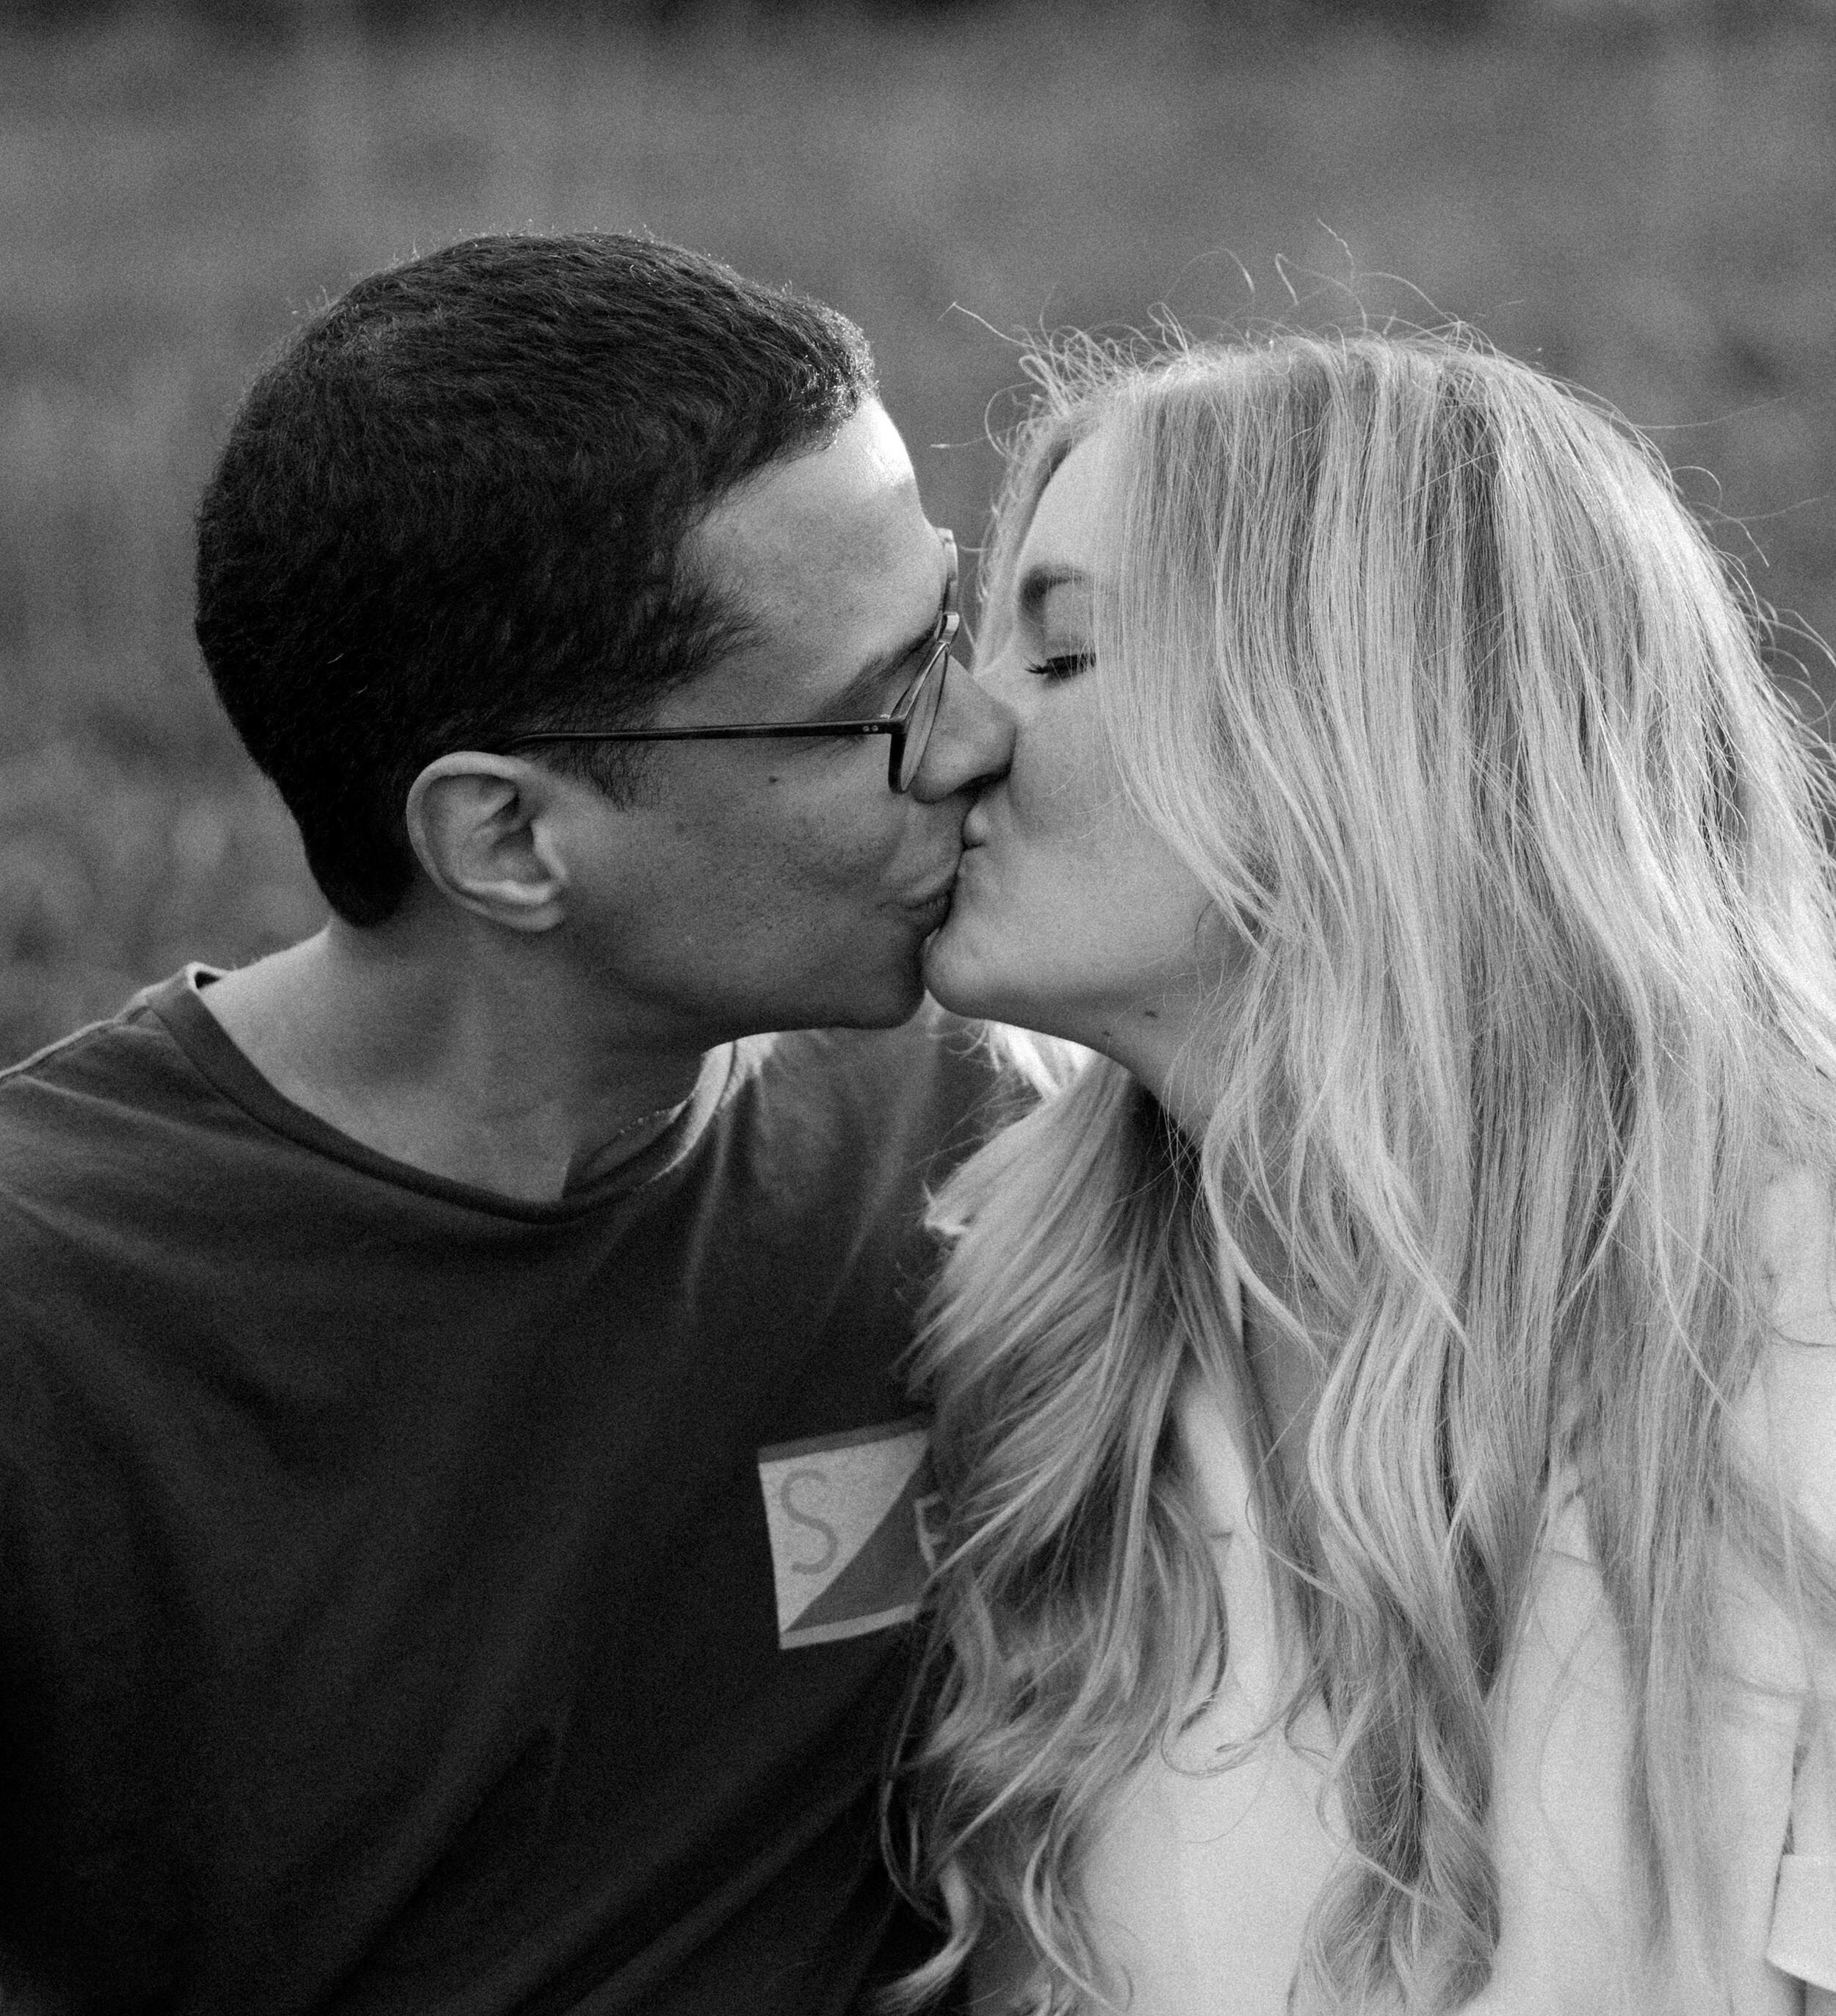 snoqualmie-pass-engagement-session22.jpg